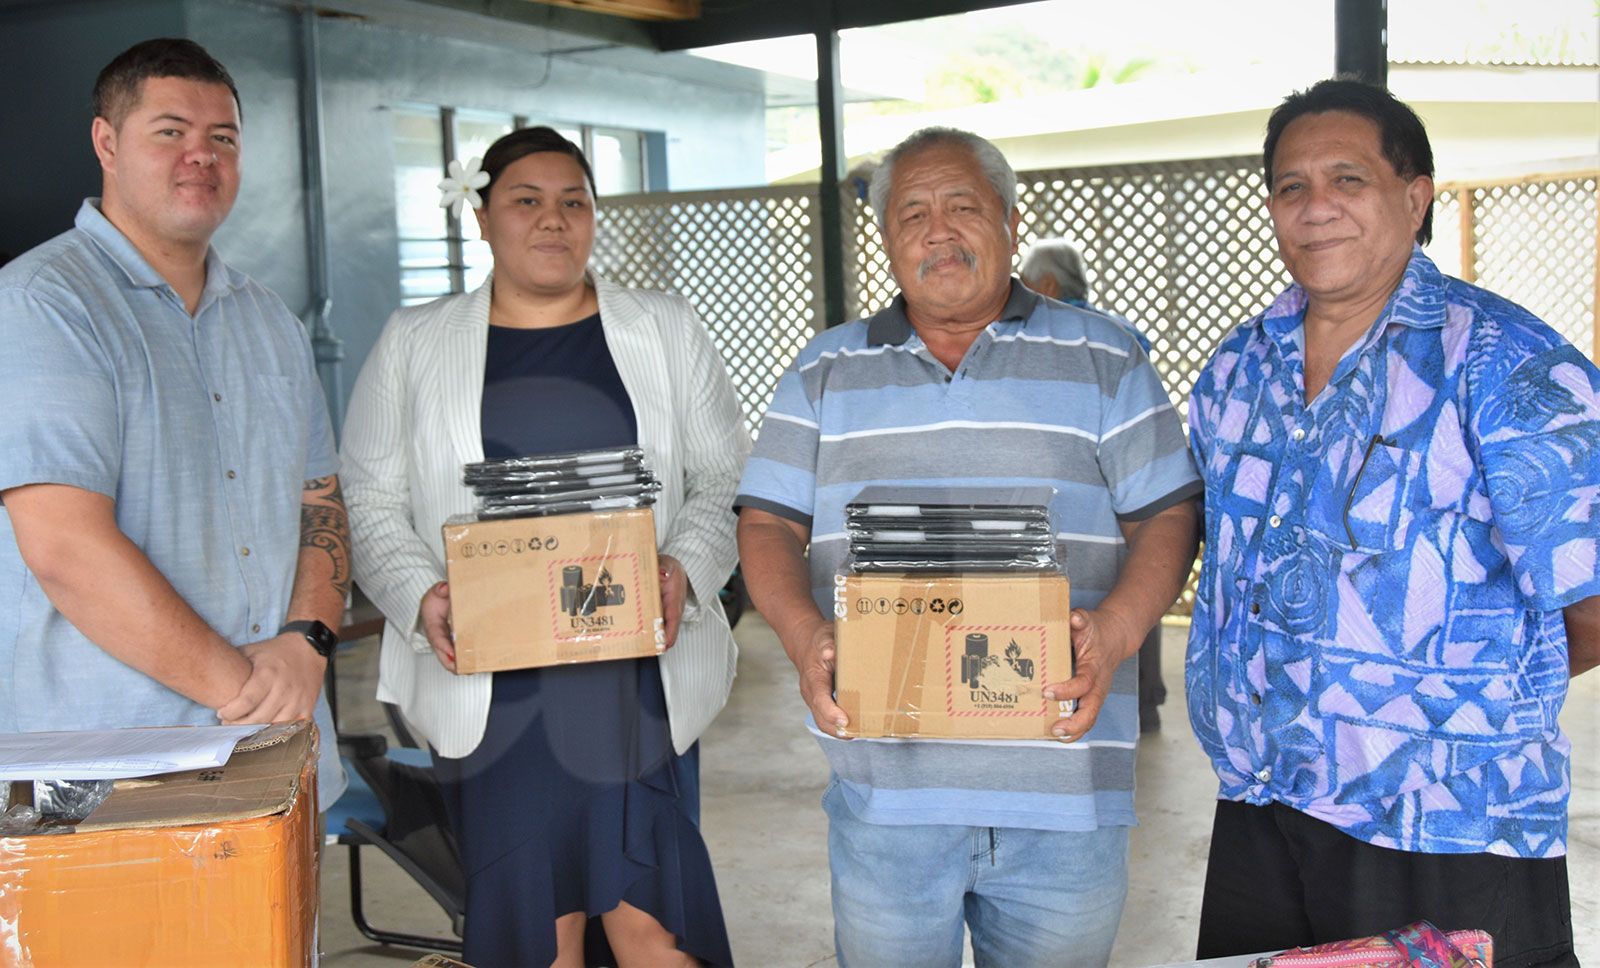 Puna strengthened with foldable beds  and tablets ahead  of cyclone season